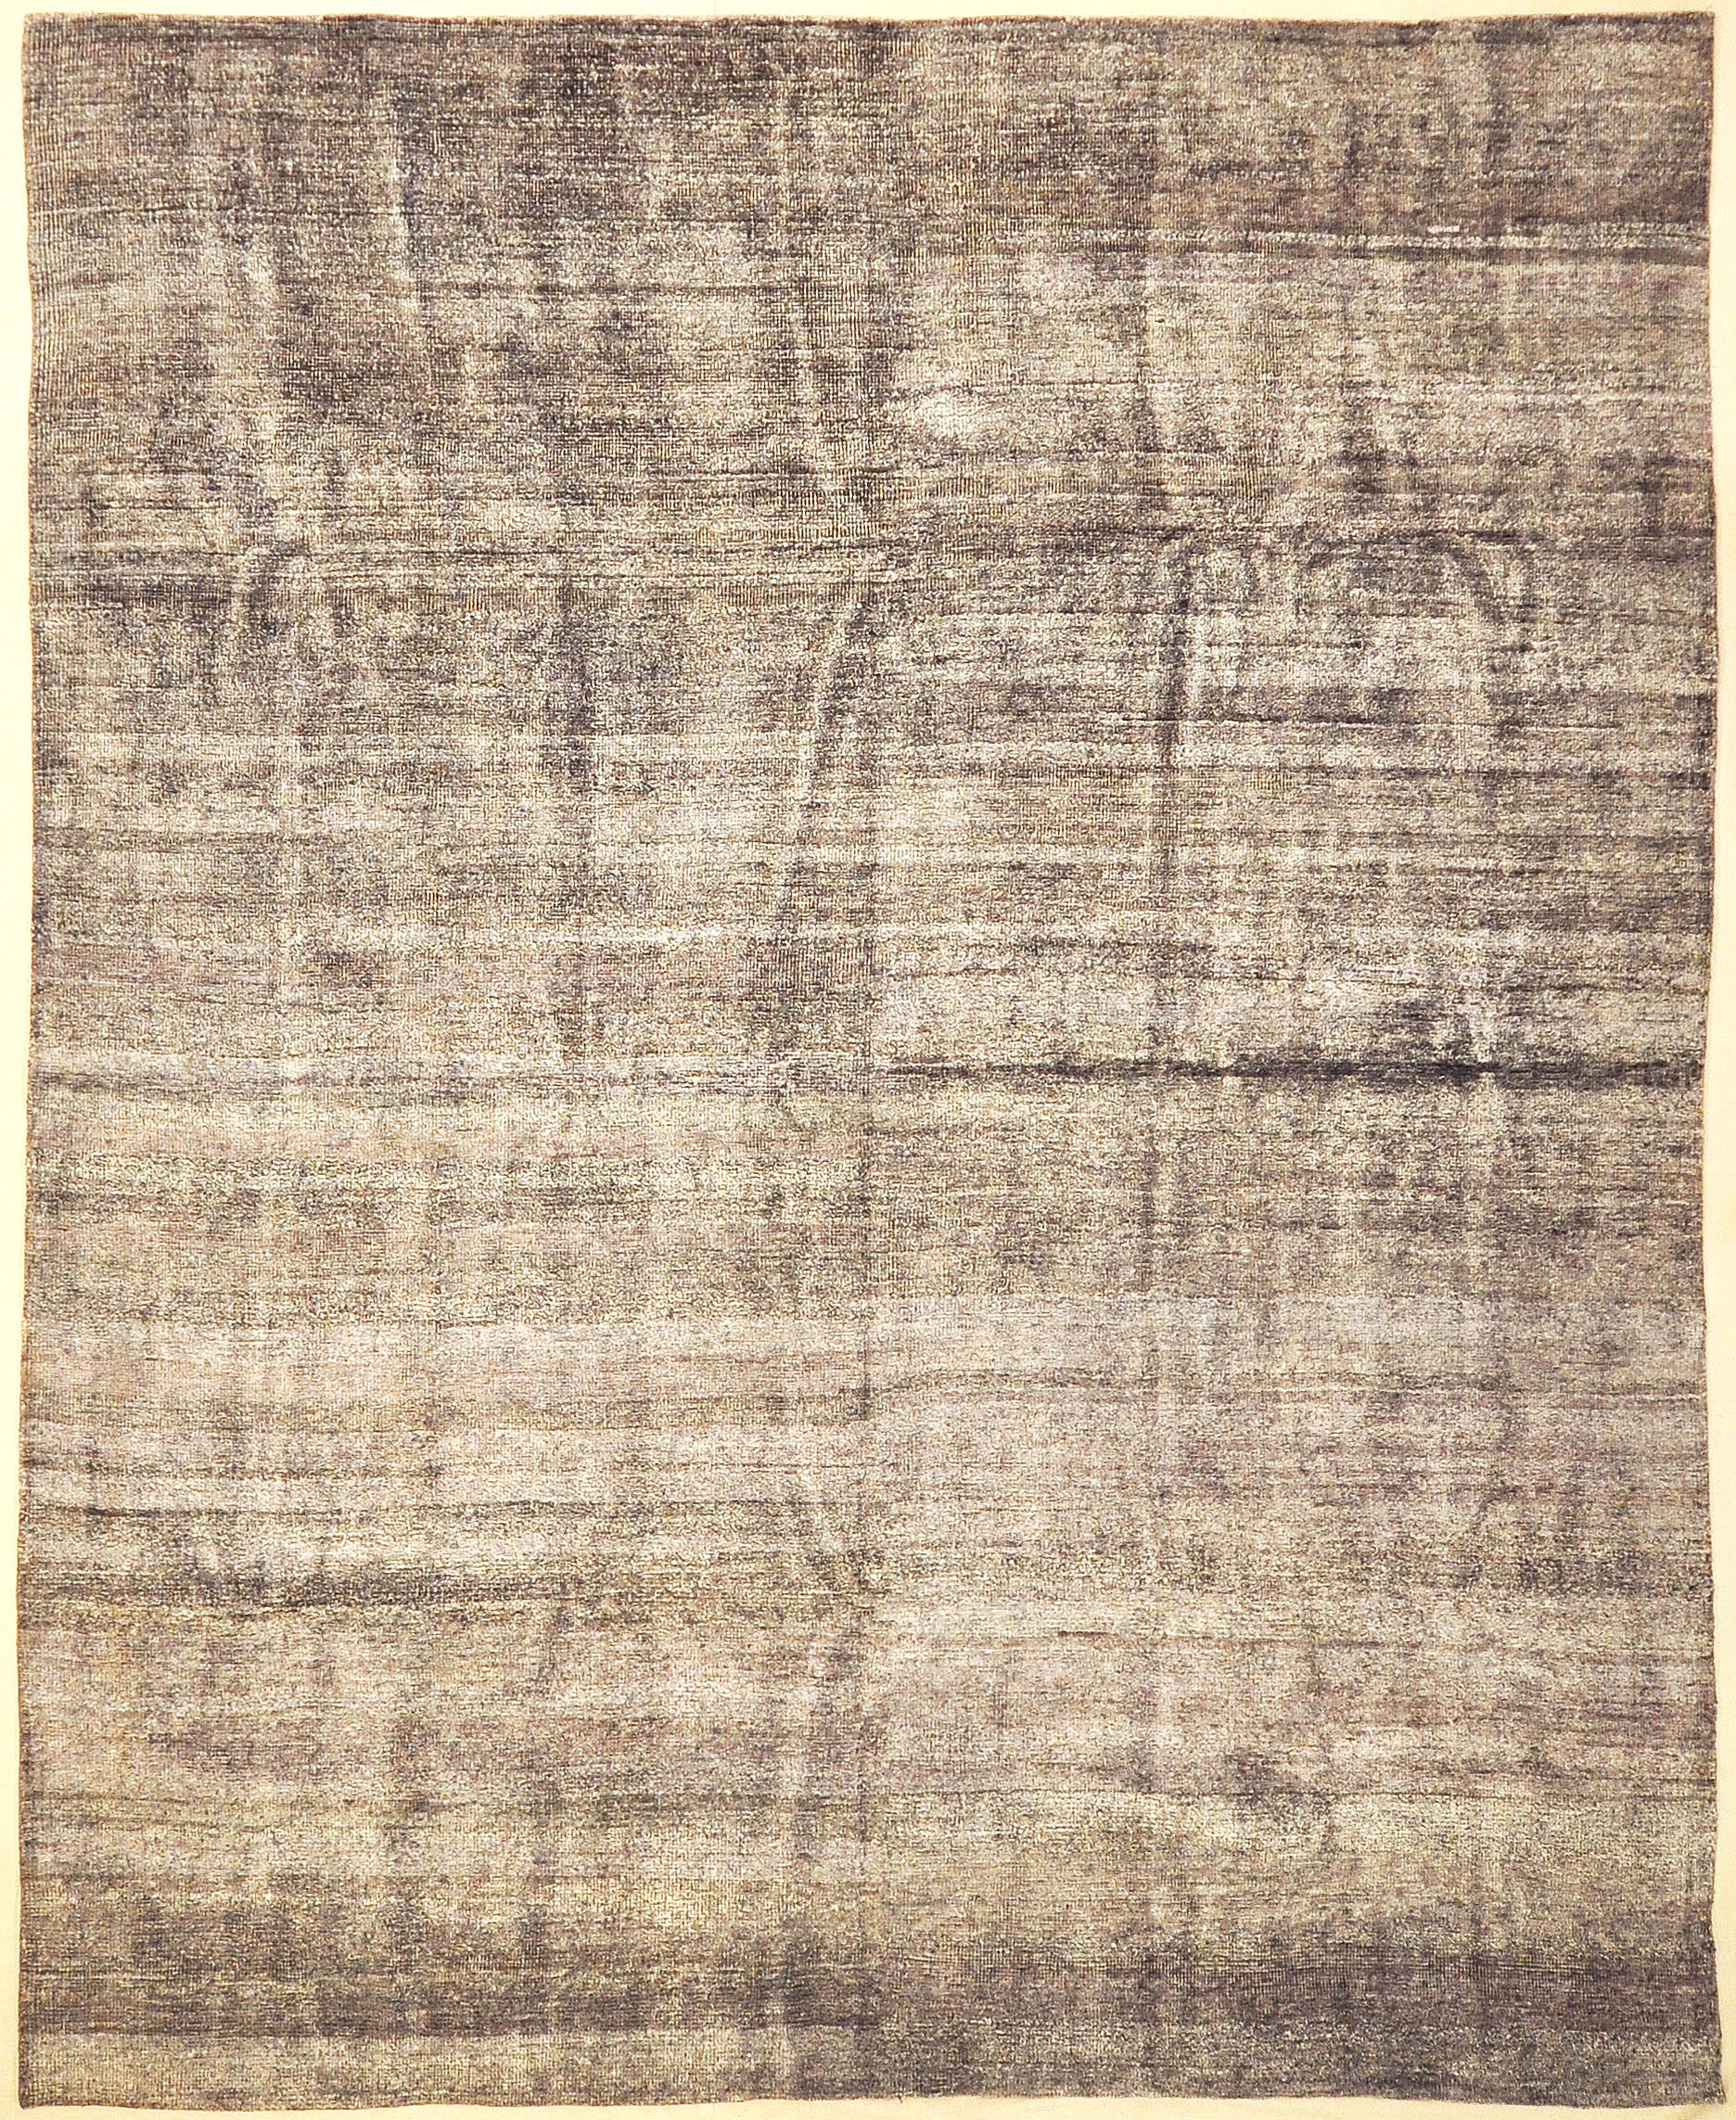 Montecito Oushak Rug 30304. A piece of genuine authentic woven art woven by Ziegler and Company and sold by Santa Barbara Design Center, Rugs and More.